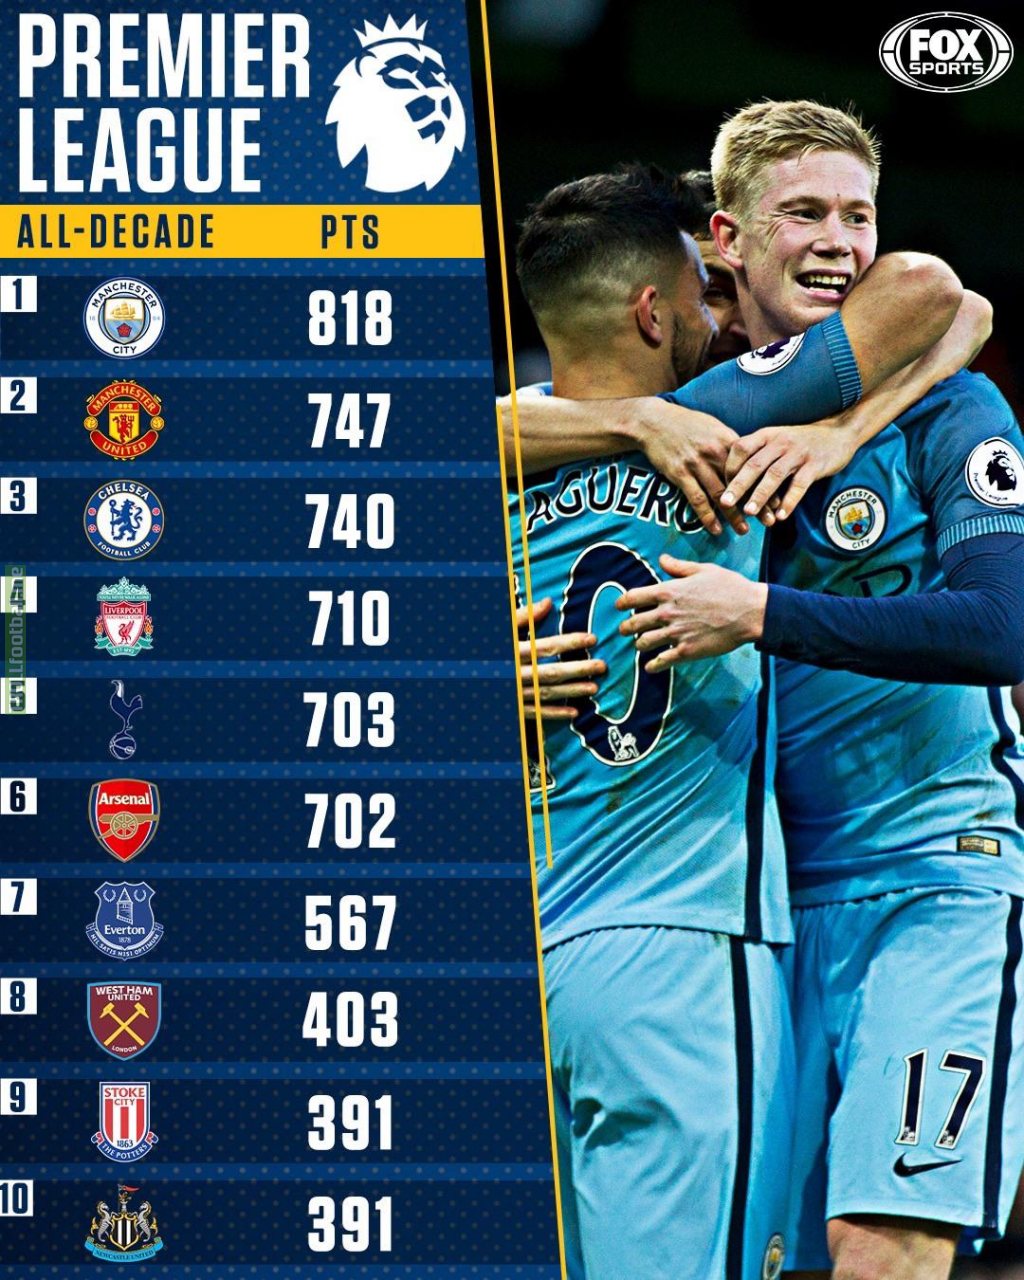 Premier League Top 10 total points from this decade